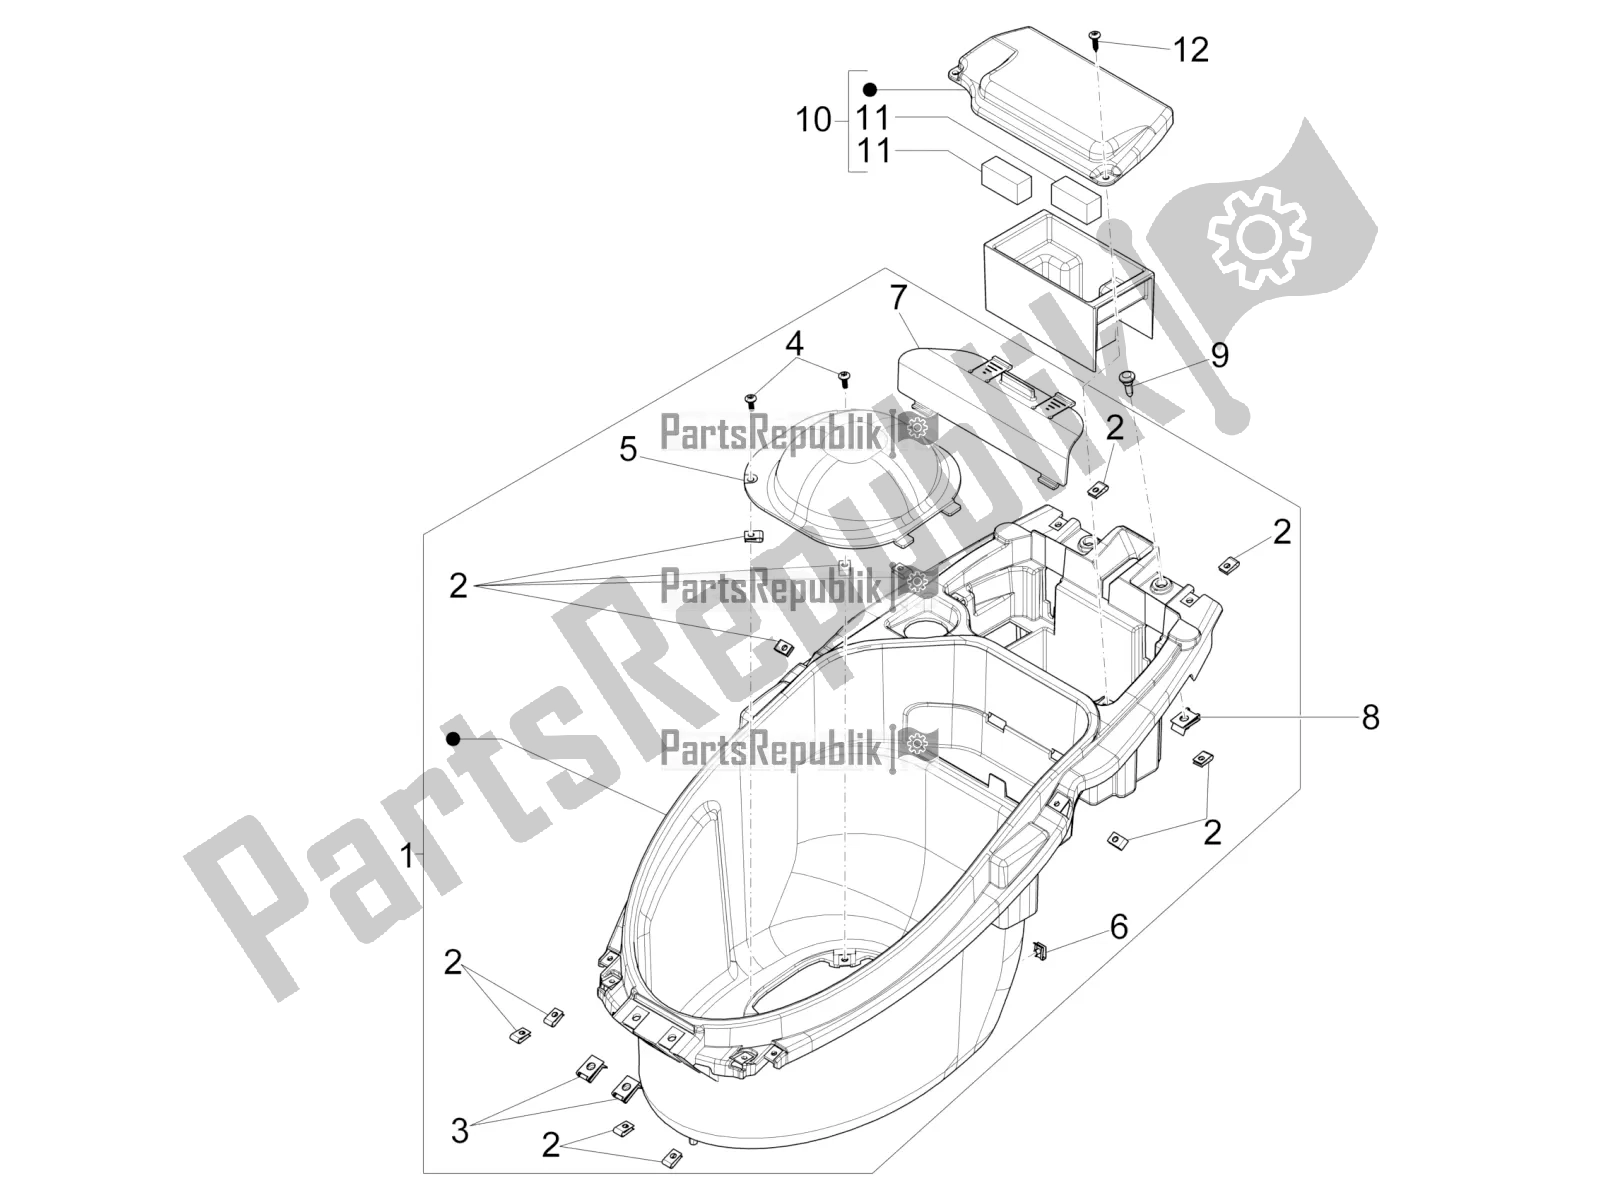 All parts for the Helmet Huosing - Undersaddle of the Piaggio NRG Power DD 0 2017